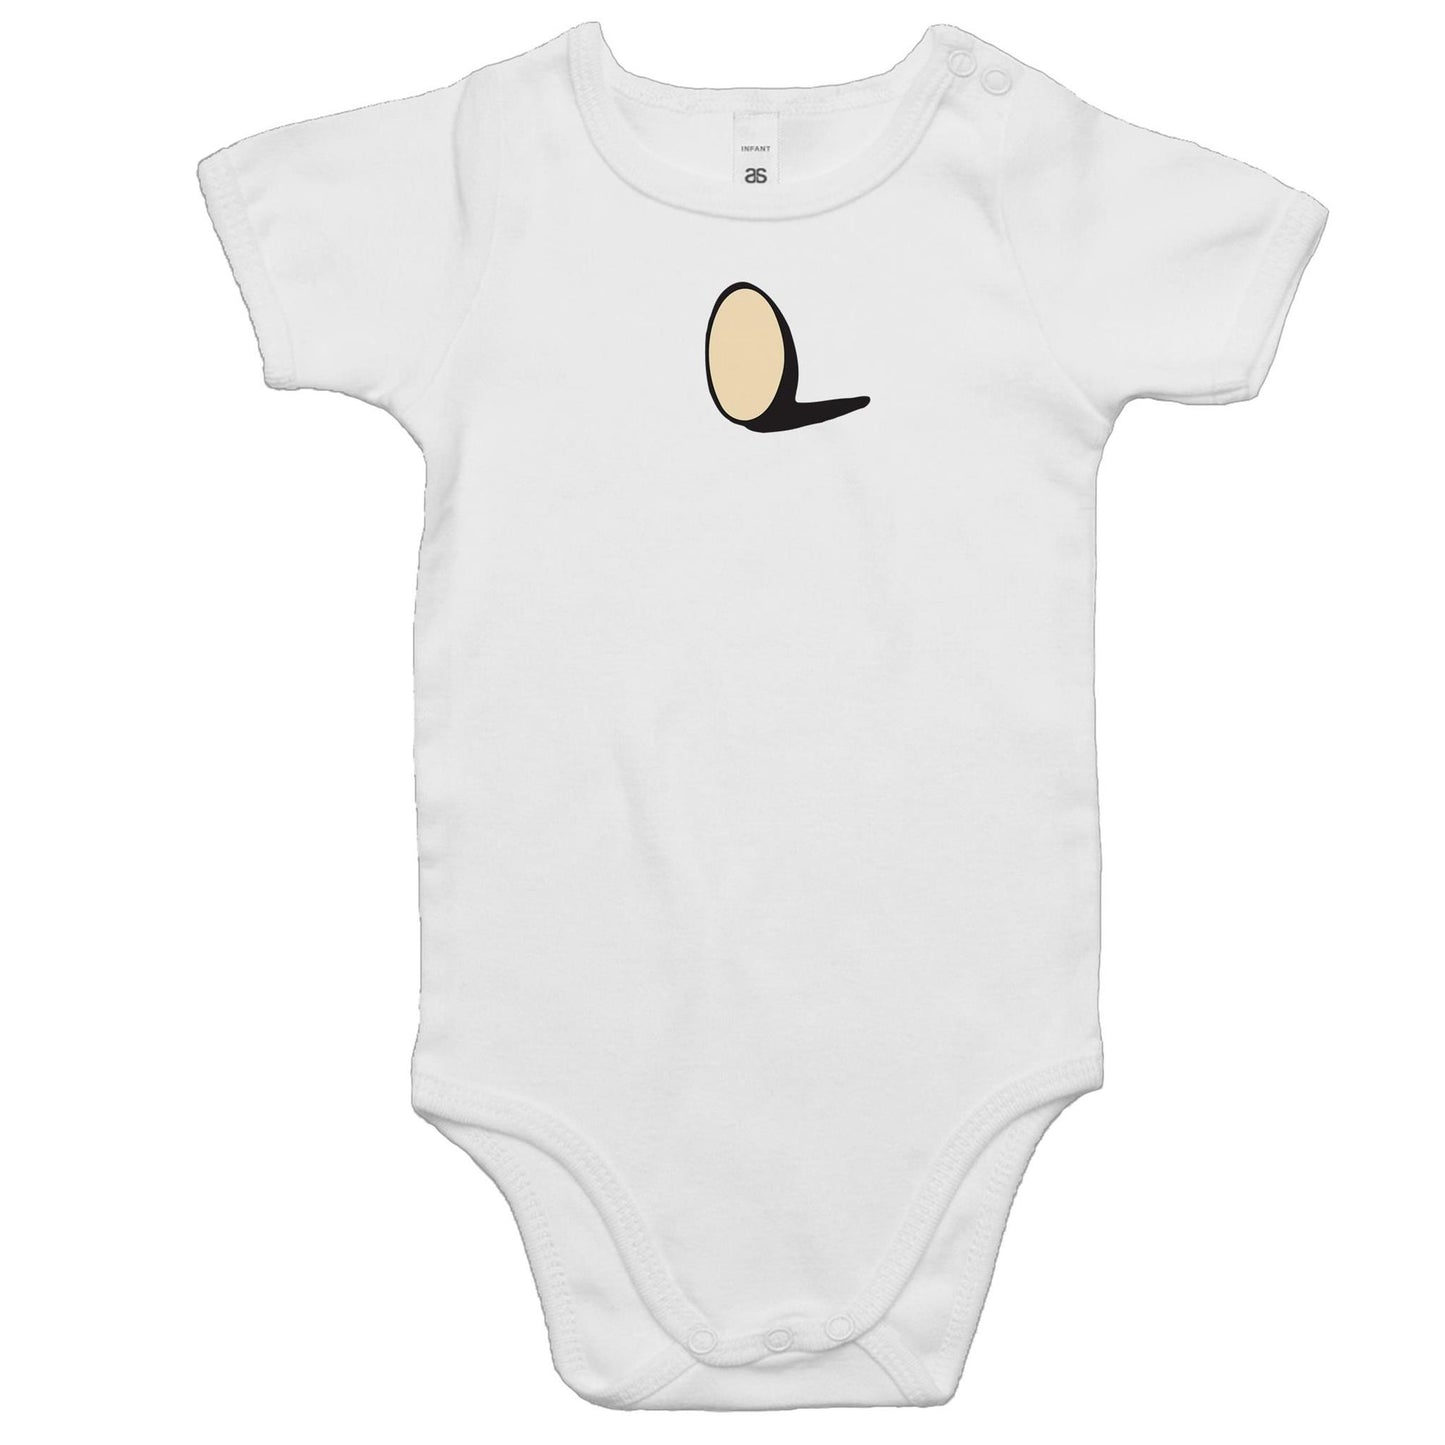 Egg Rompers for Babies